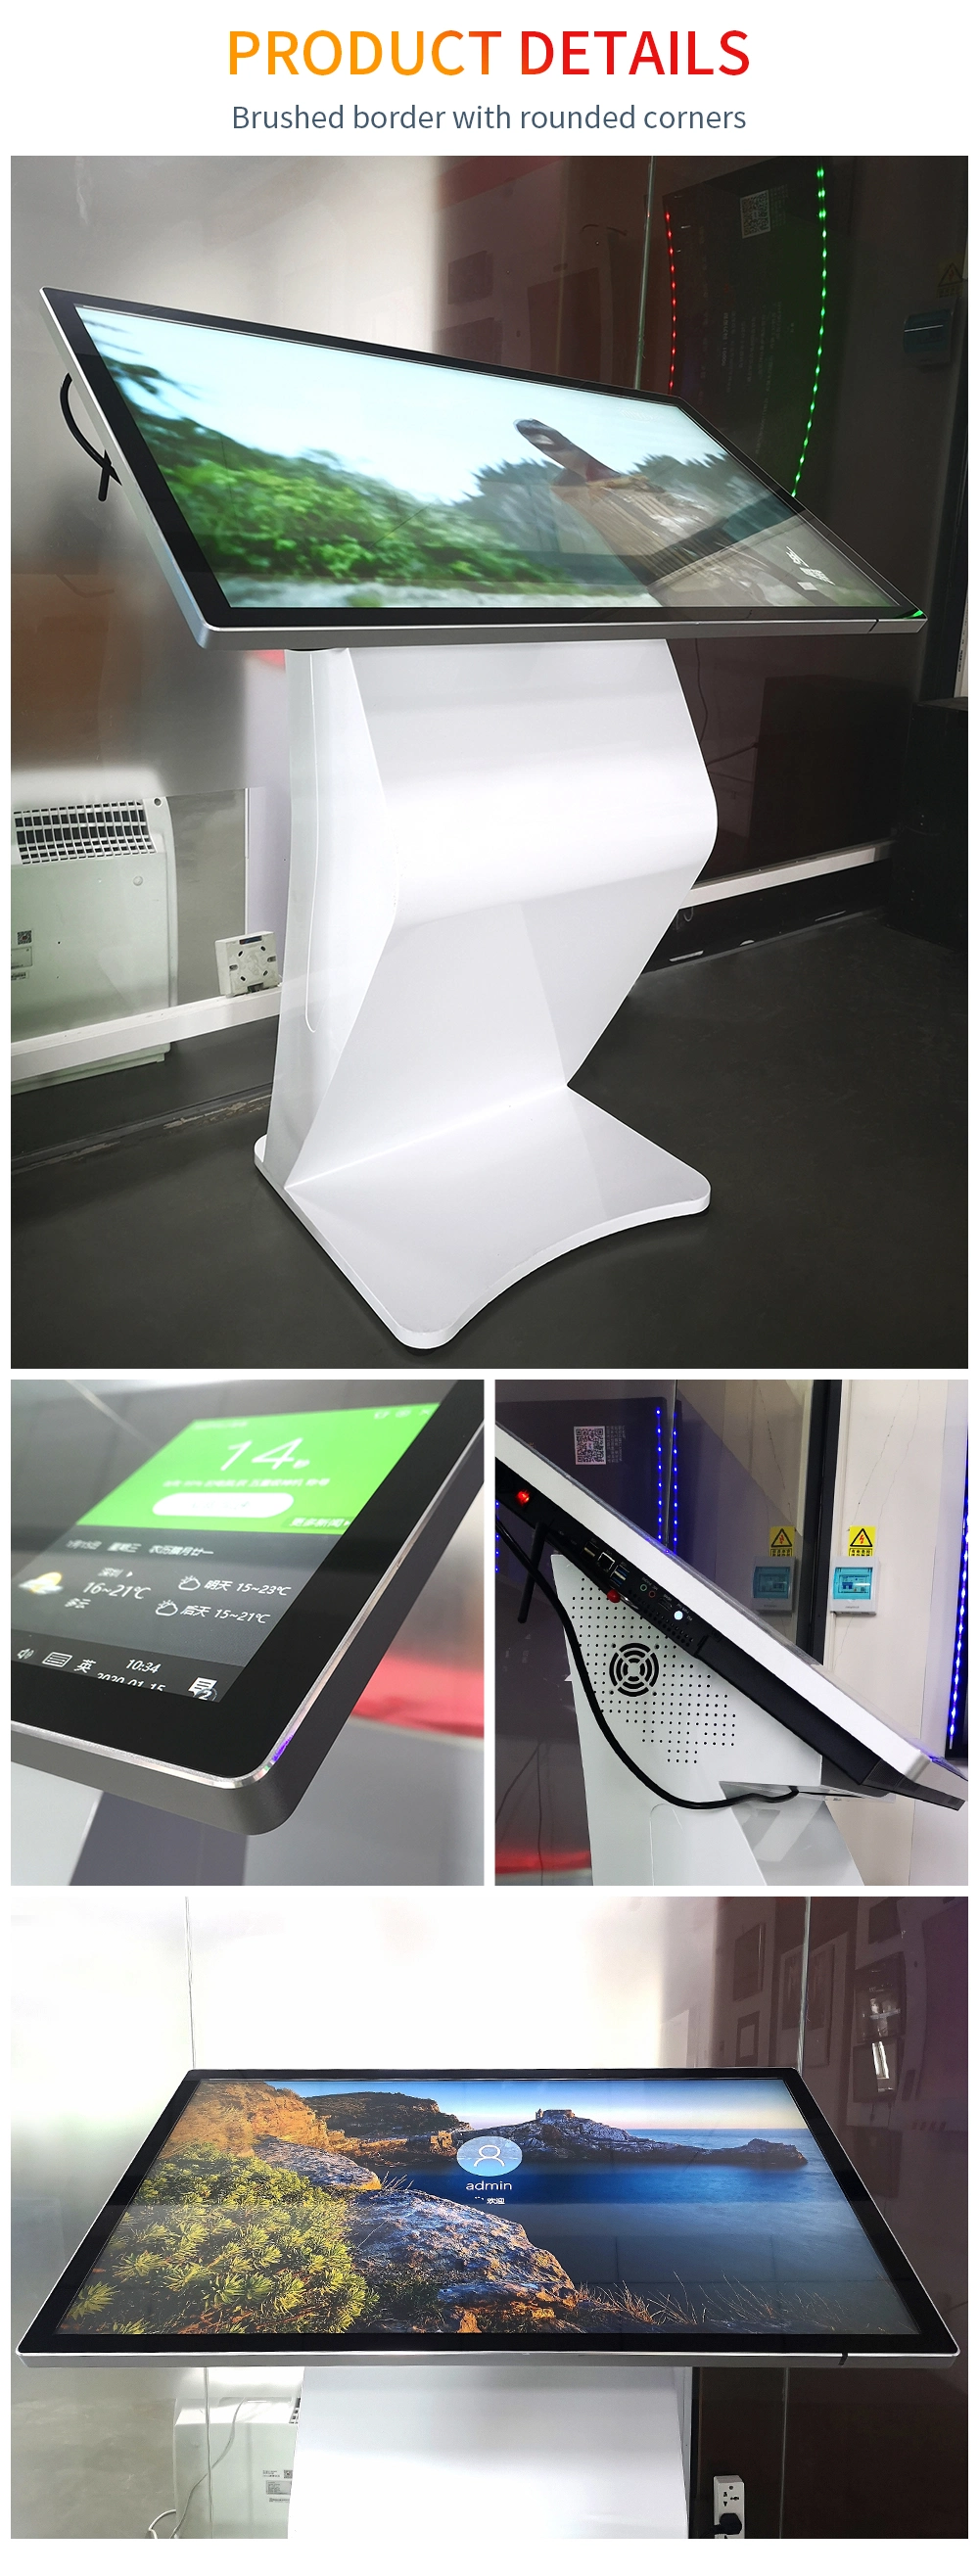 42 Inch Free Standing Book Design Win 10 System WiFi 3G Advertising Player with Shelf Holder